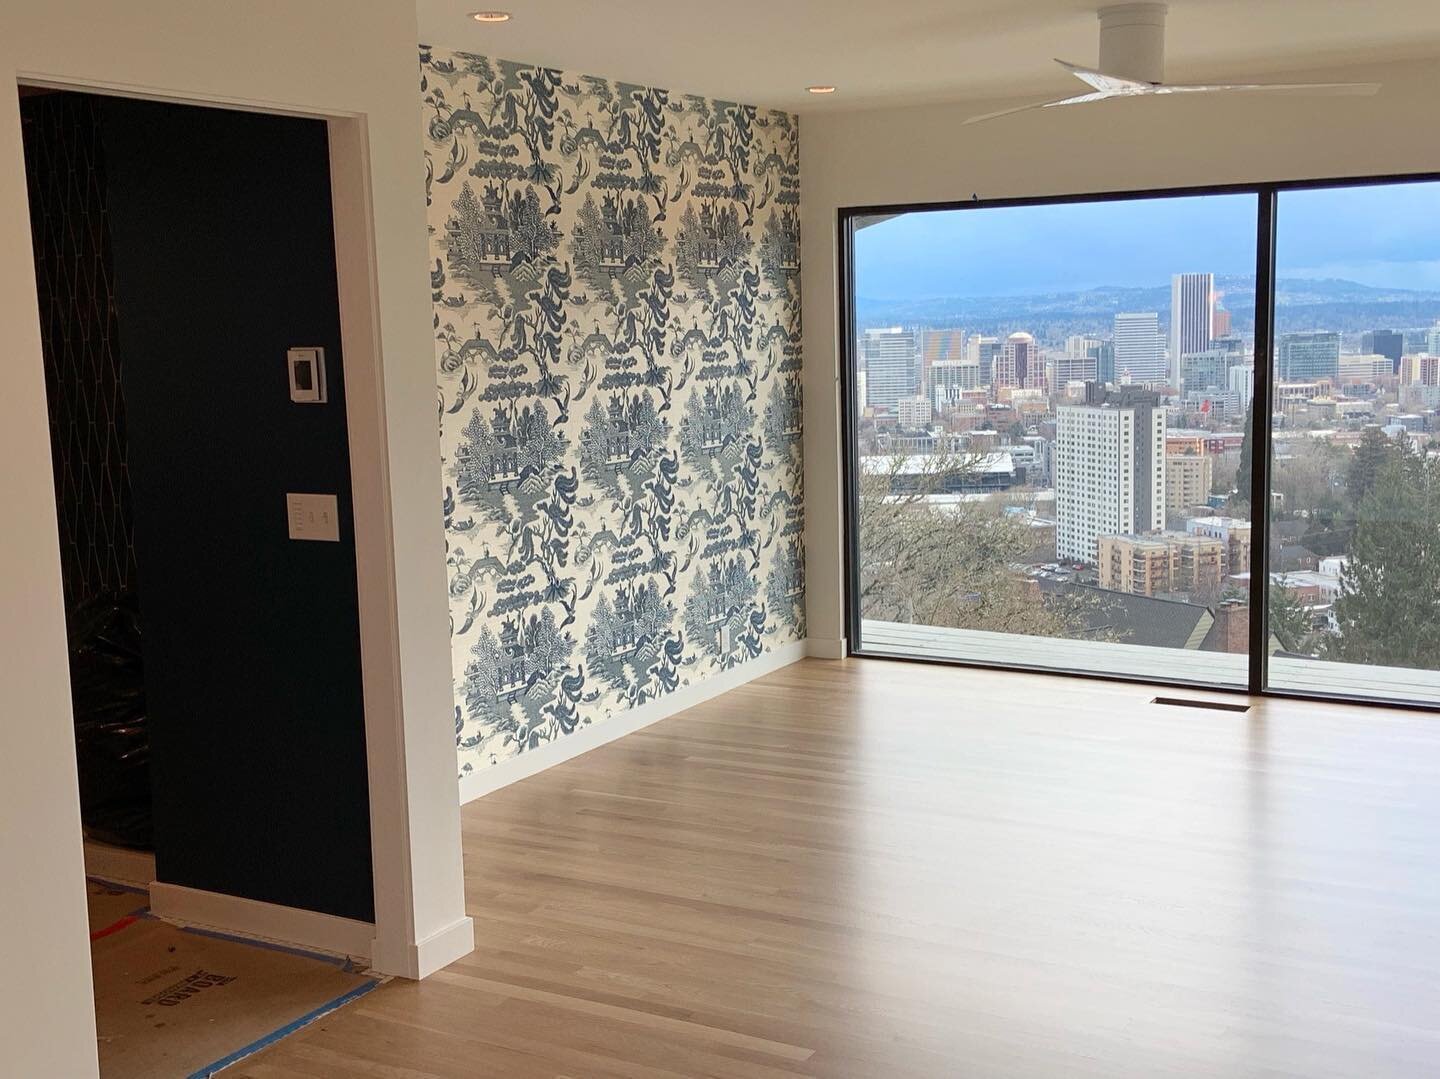 Behind the scenes of a project in the works! 📸

These gorgeous mid-century wallpapers are up, but there is still lots left to do! Delayed doors to install, furniture to place, and decor to bring the whole design together. Luckily, we have everything